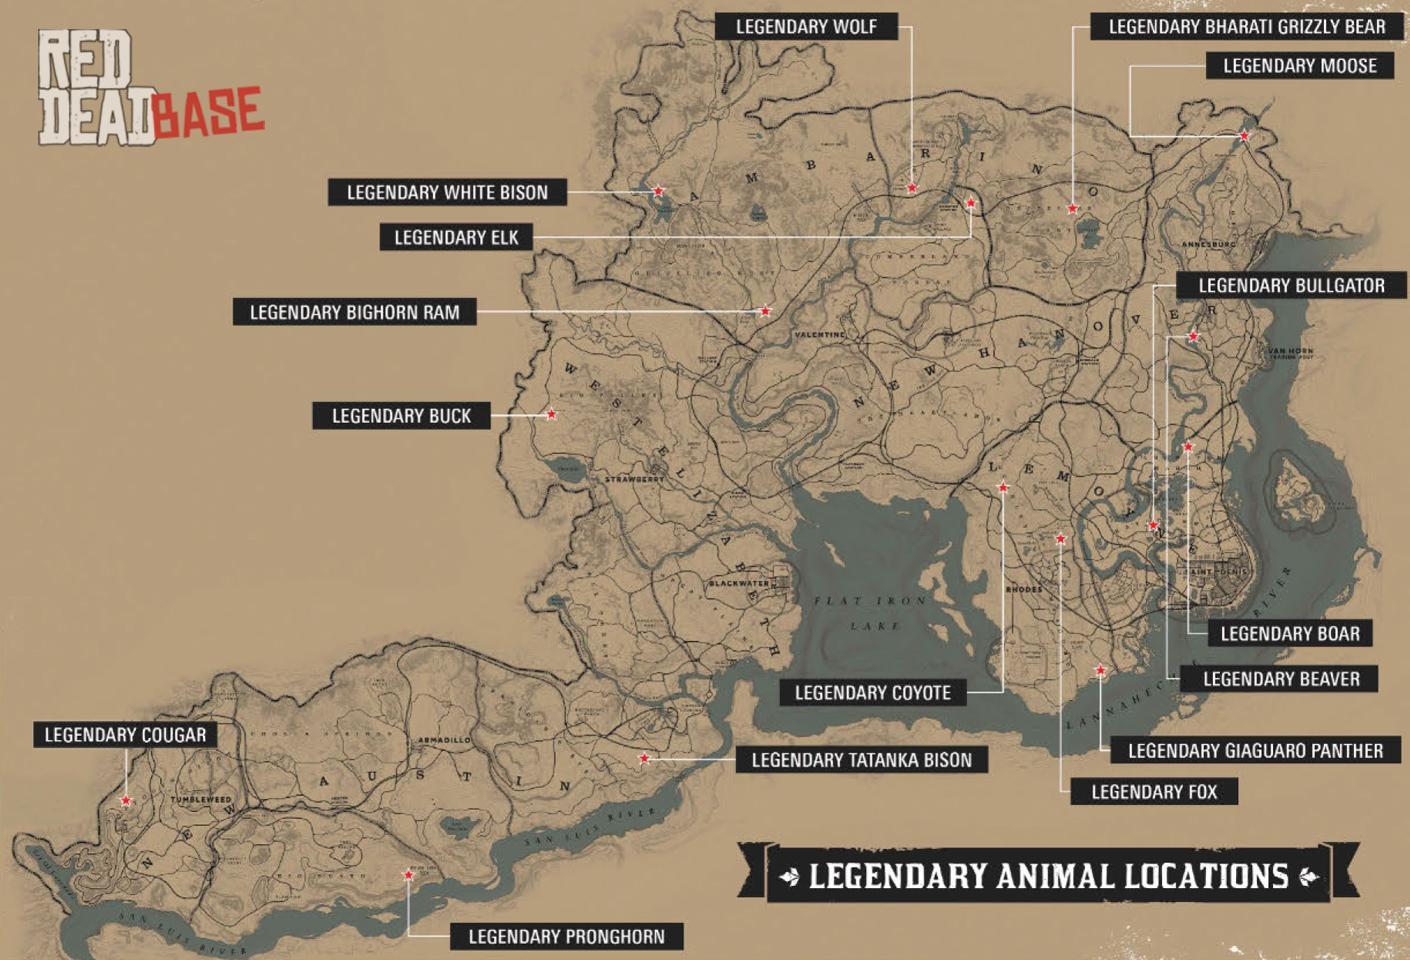 Legendary Moose - Map Location in RDR2